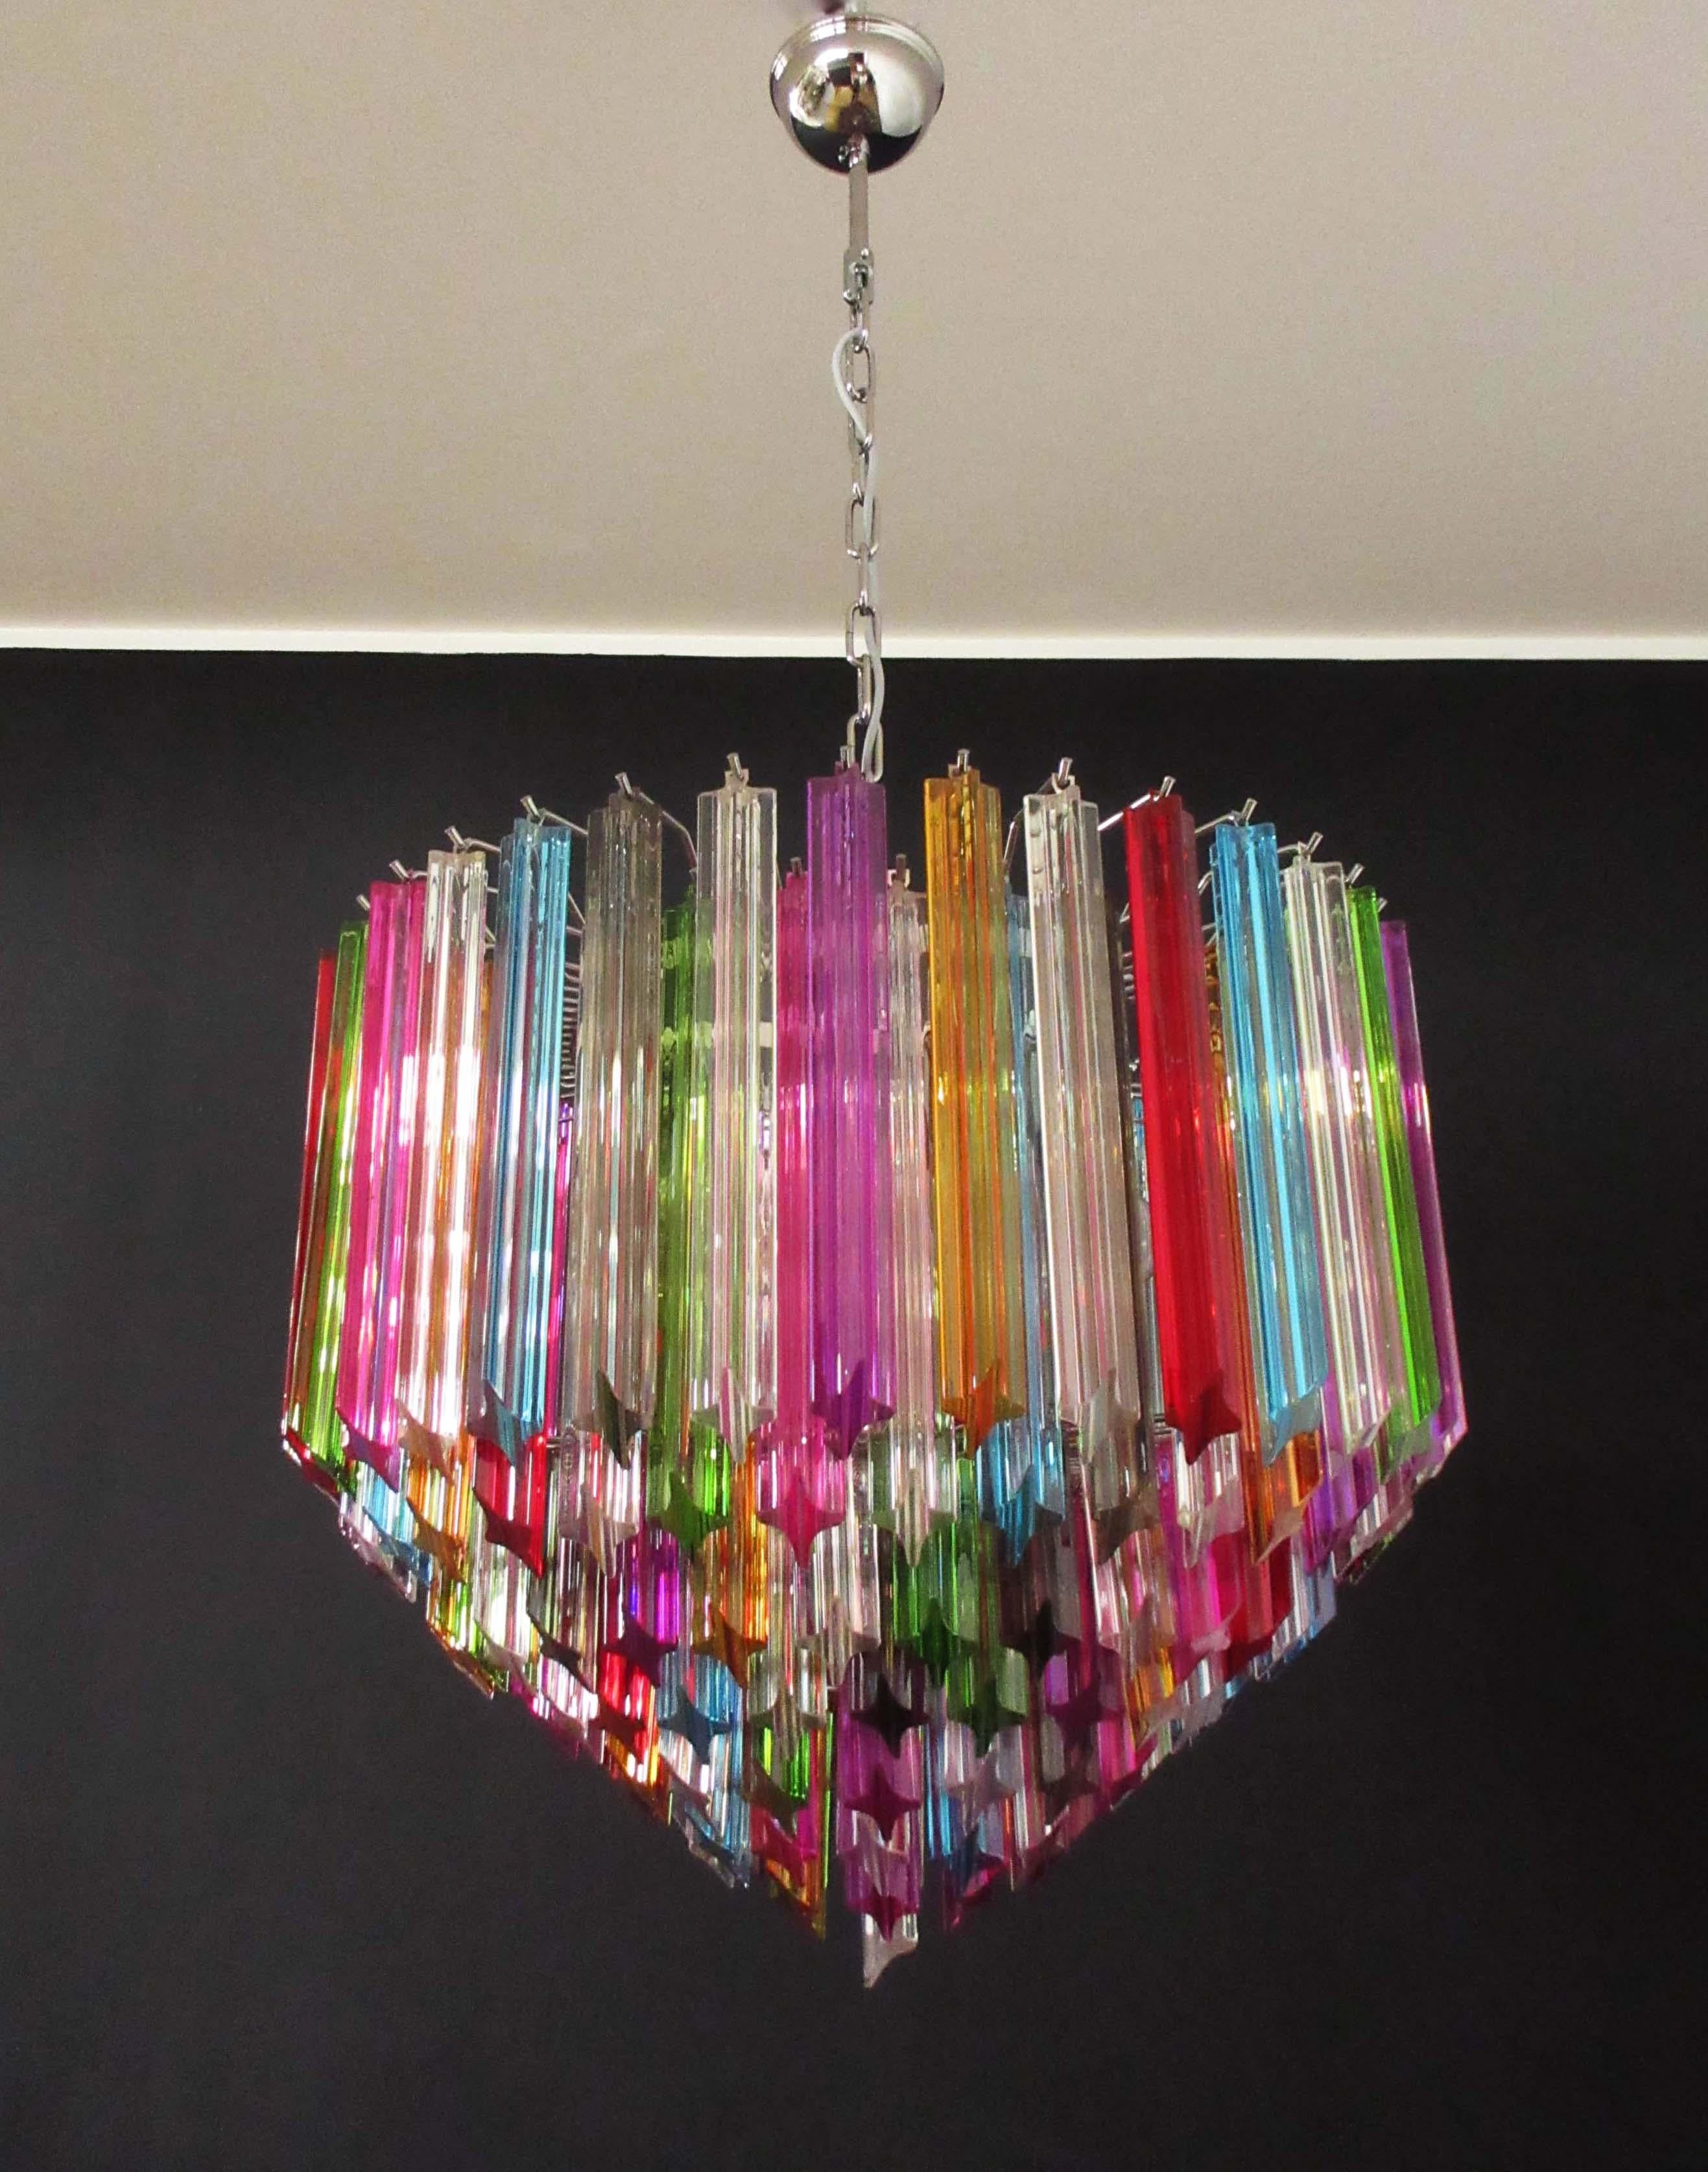 A magnificent murano glass chandelier, 163 multicolored quadriedri on nickel metal frame. This large mid-century Italian chandelier is truly a timeless classic.
Period: late xx century
Dimensions: 49,20 inches (125 cm) height with chain; 21,60